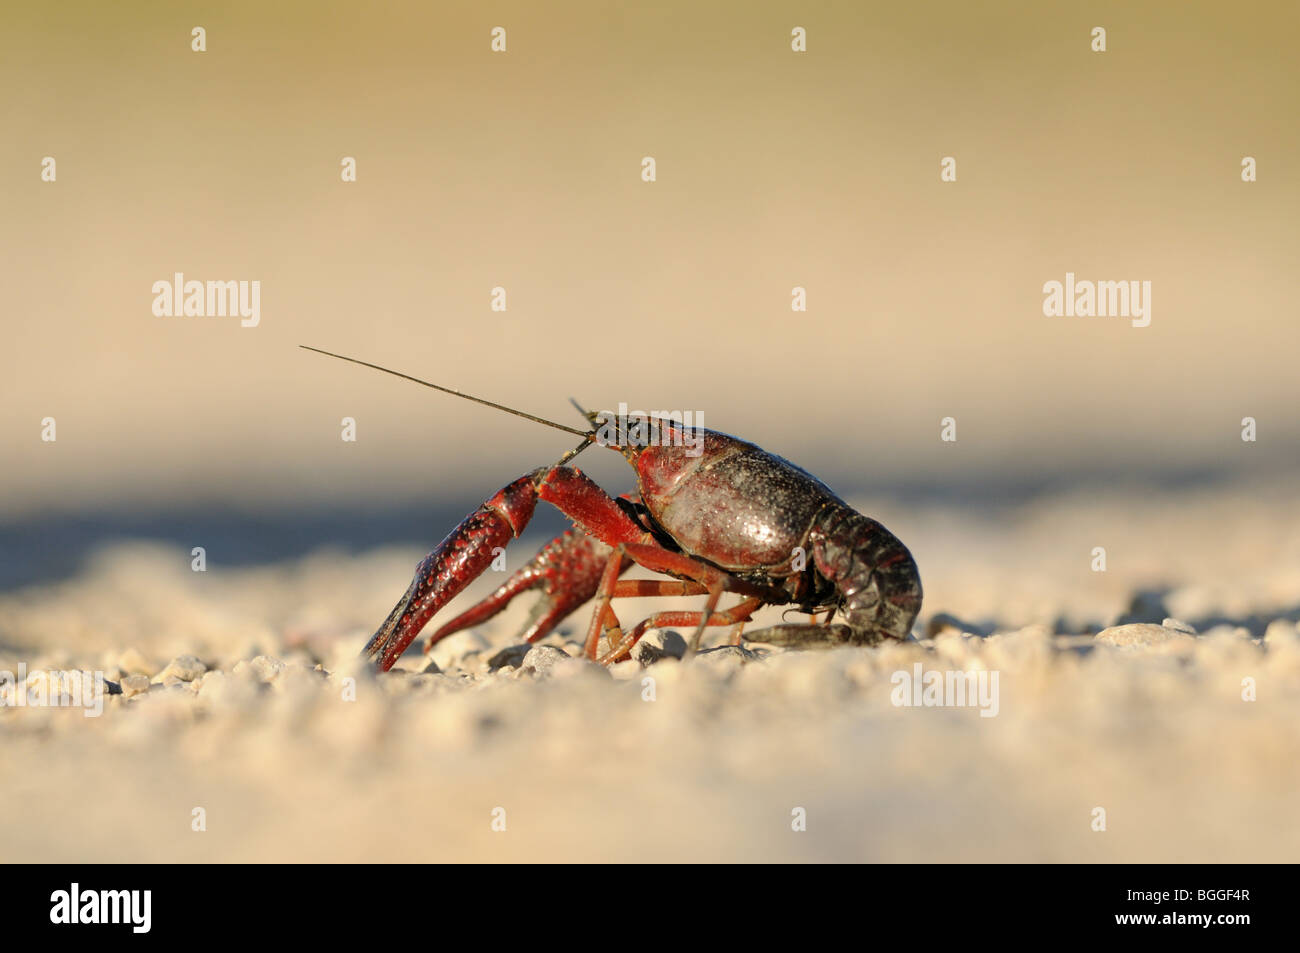 Galician crayfish (Astacus leptodactylus) on gravel bed, Catalonia, Spain, side view Stock Photo